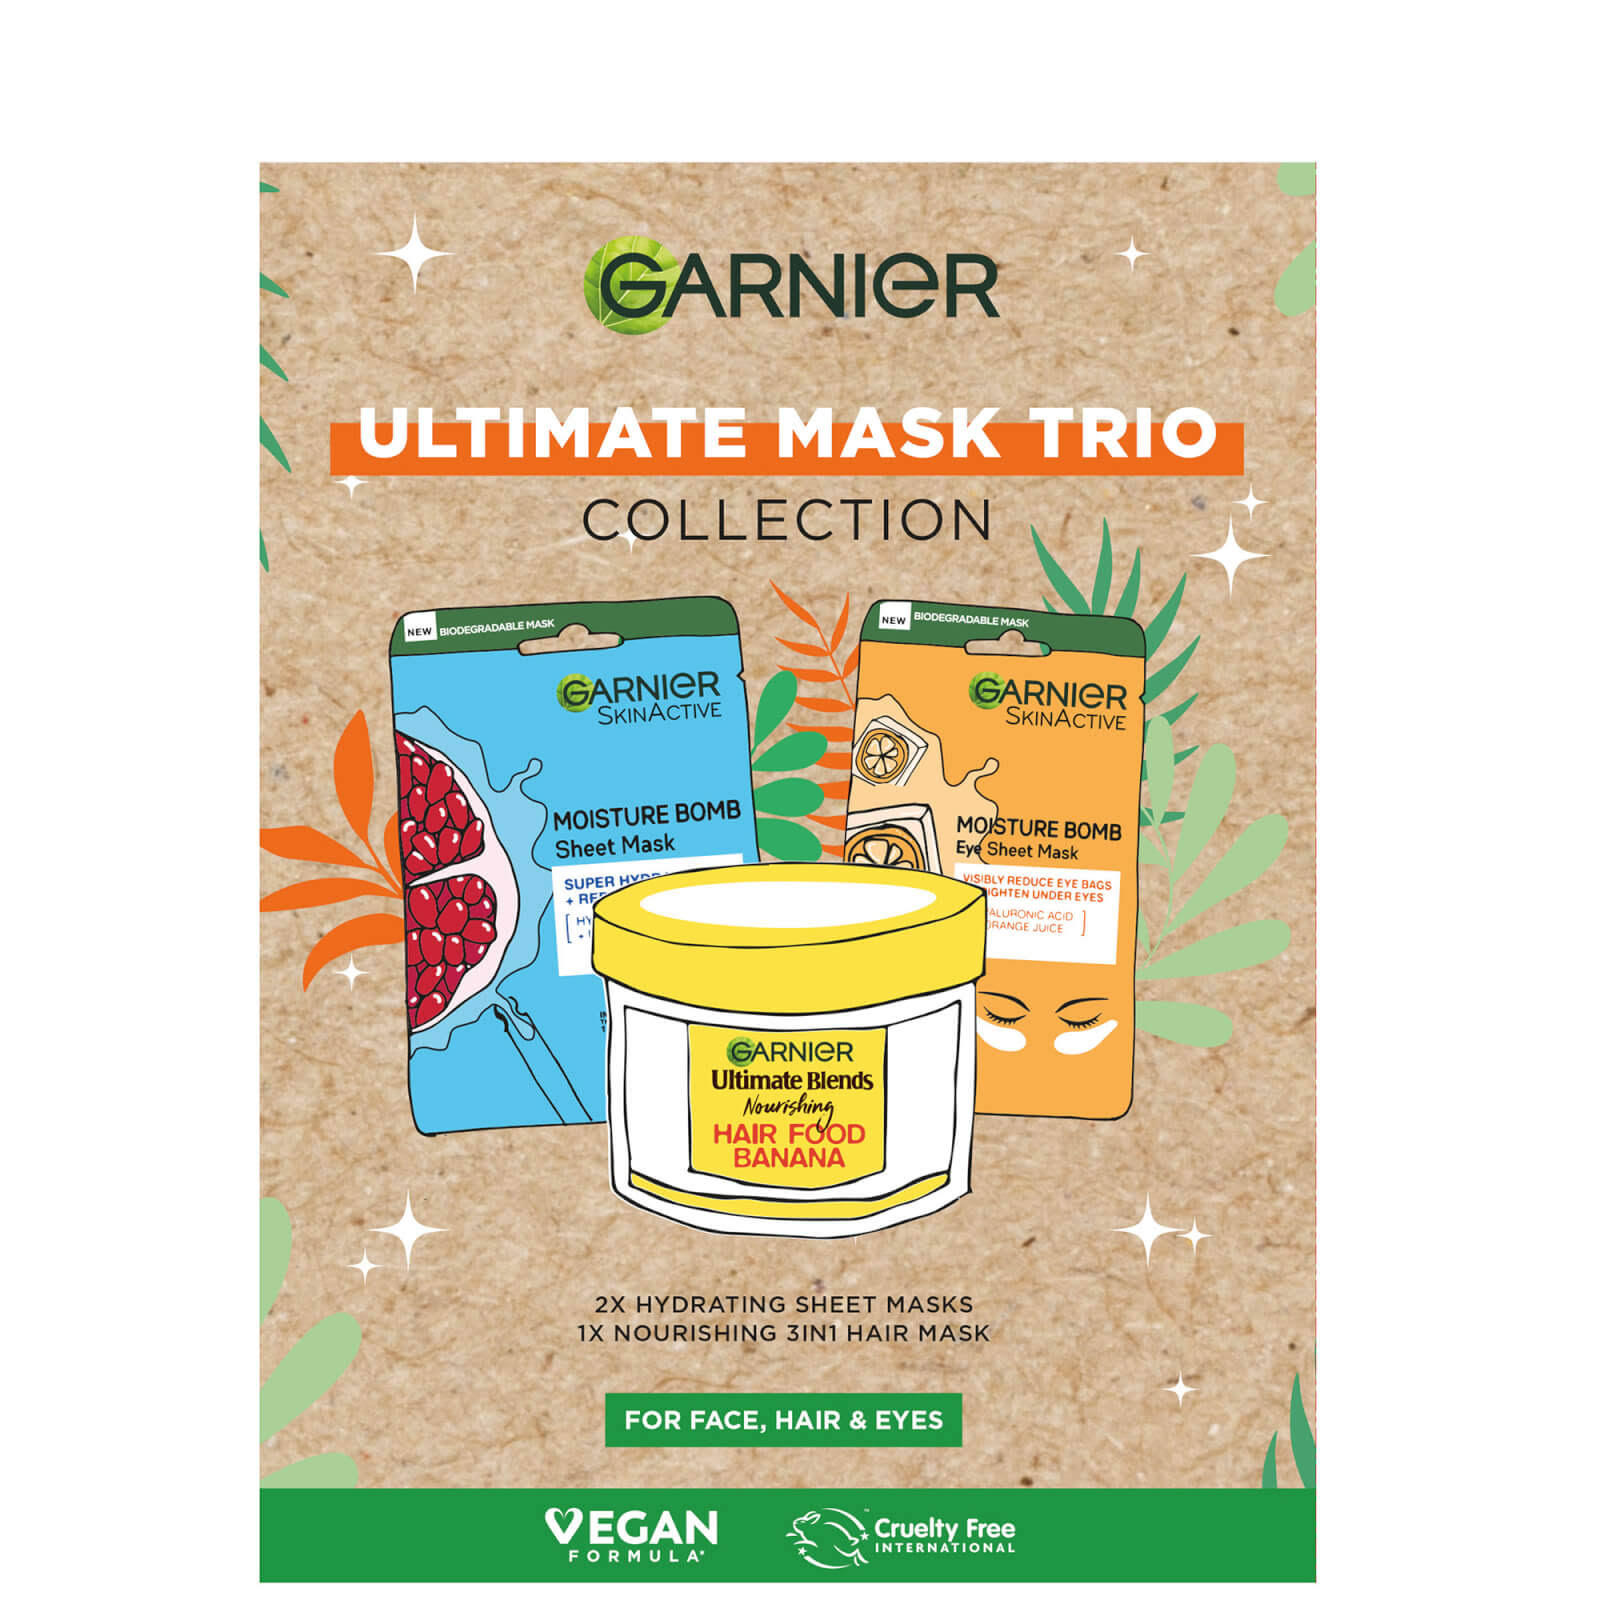 Garnier Ultimate Mask Trio For Face, Hair And Eyes